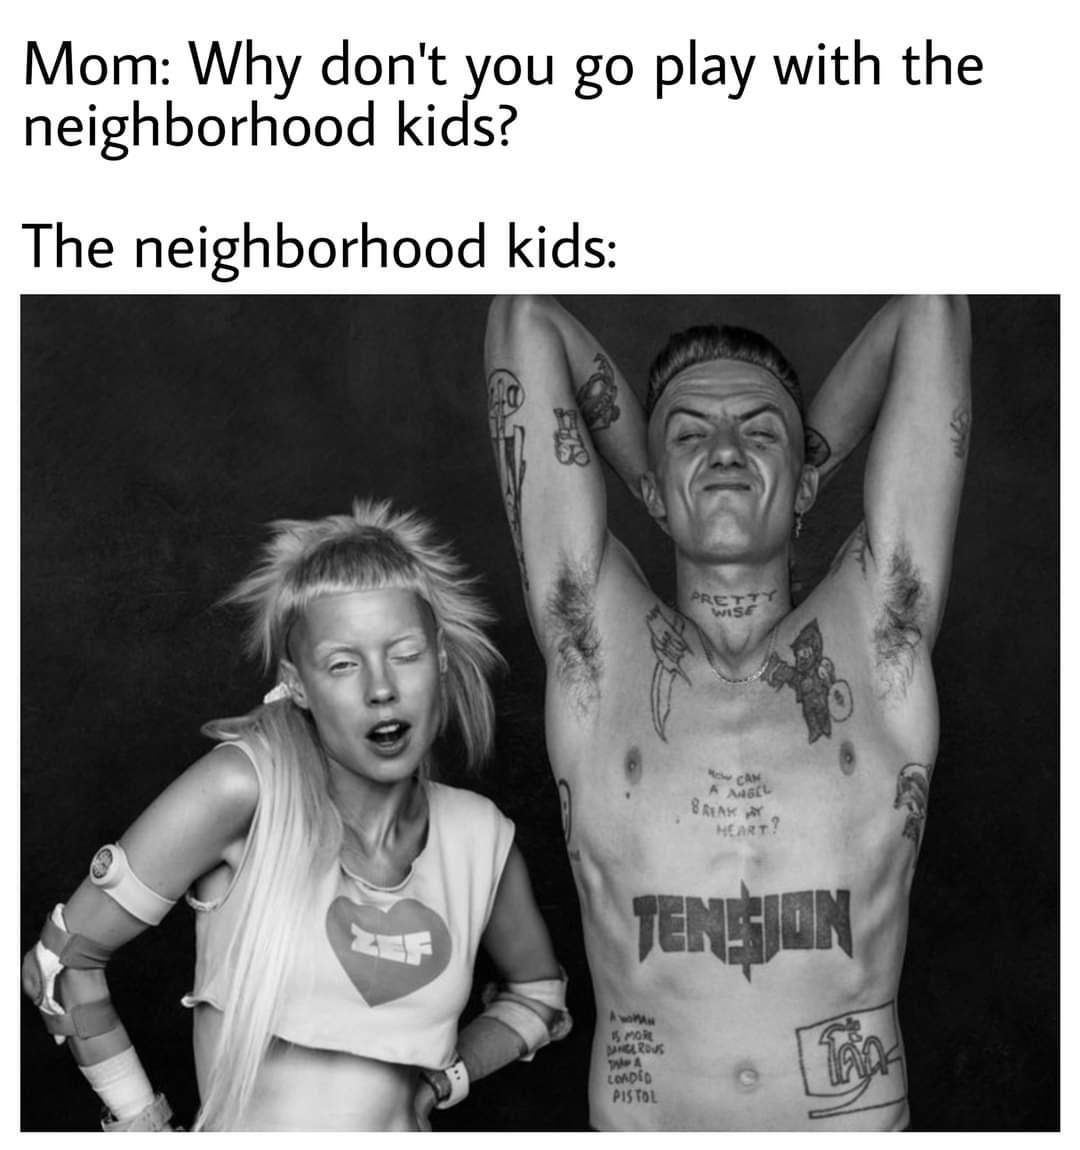 dead antwoord - Mom Why don't you go play with the neighborhood kids? The neighborhood kids Pretty Wise How Can A Mcl Break Heart? Tensjon Mor Miros Wa Loadid Pistol Tahun